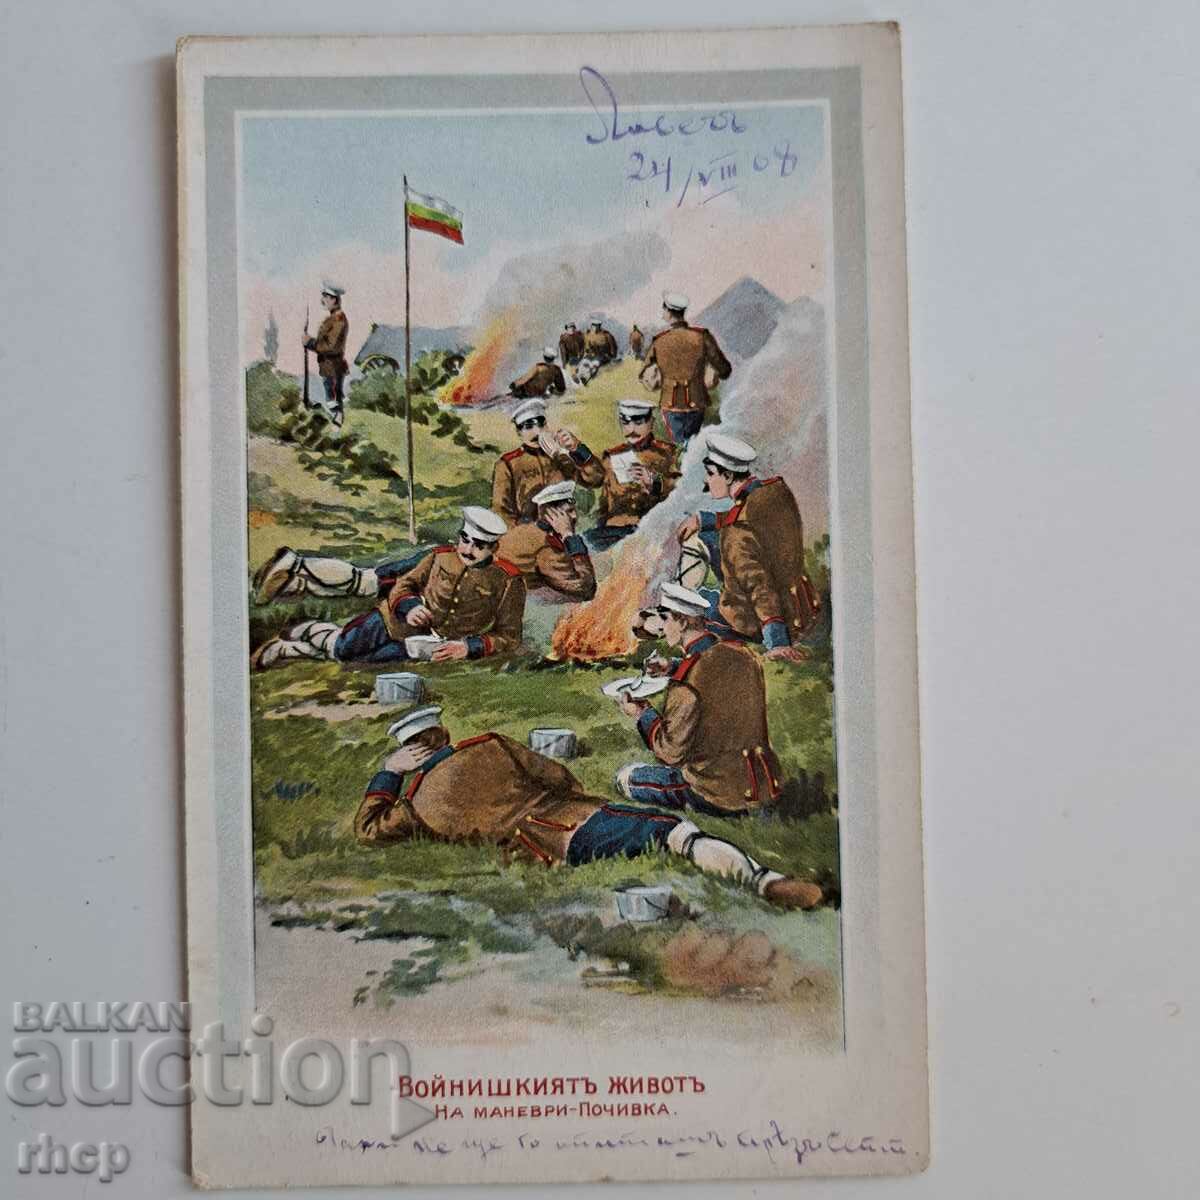 Soldiers 1908 Old color lithographed postcard